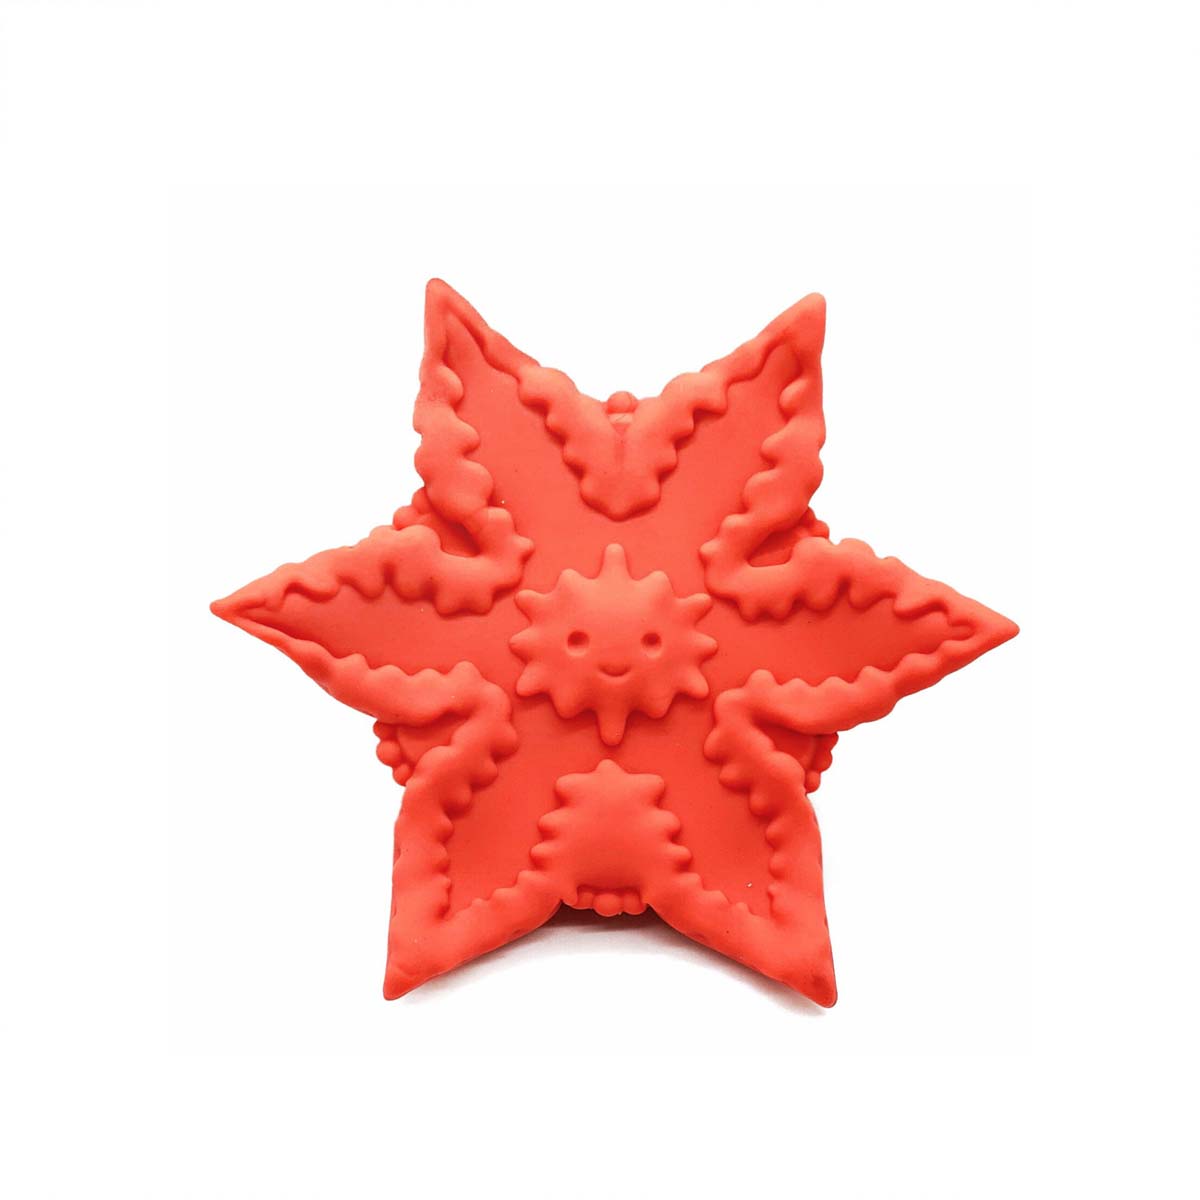 Coral star-shaped silicone vibrator for all genders Nudie Co